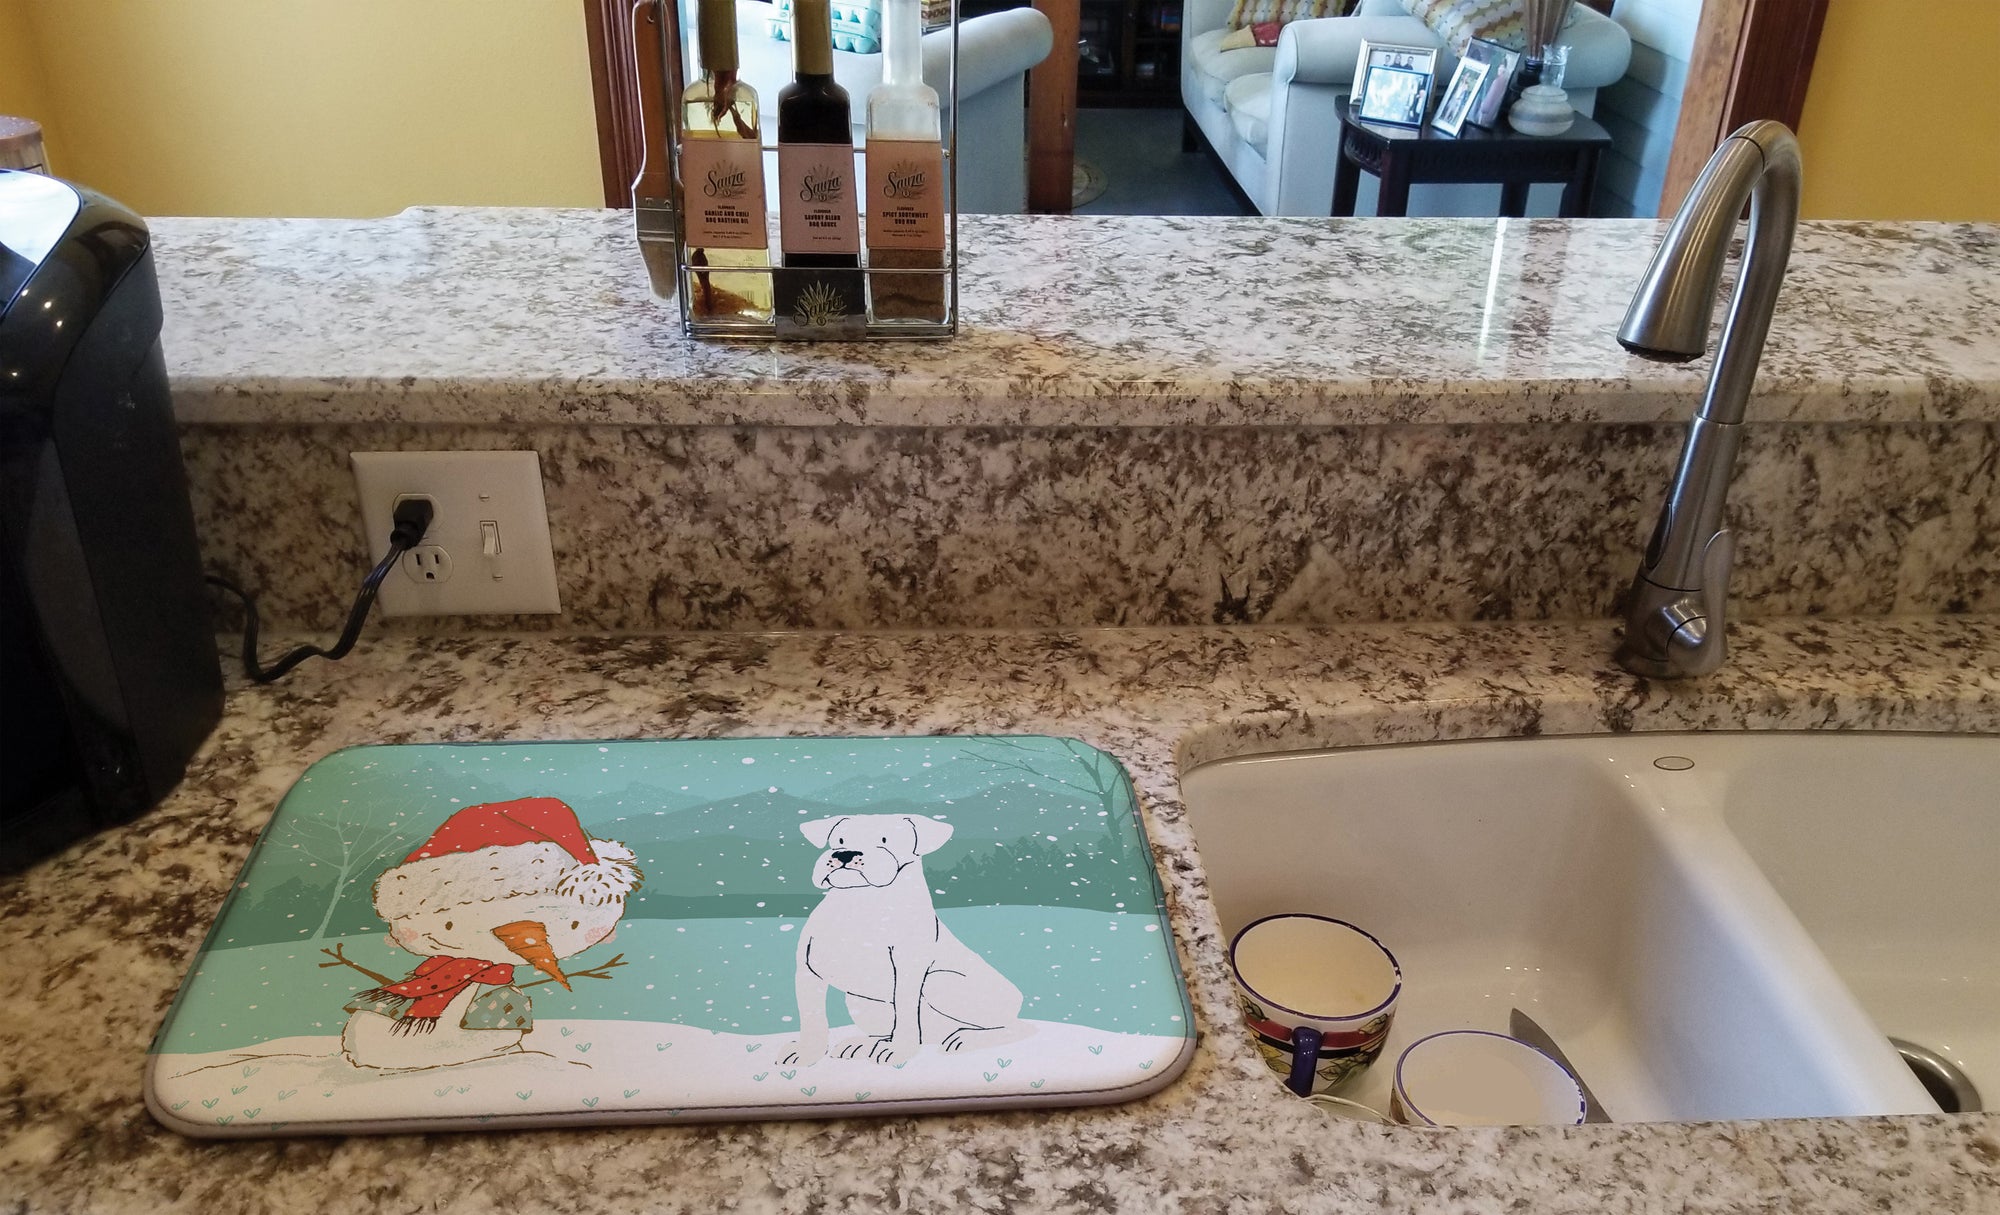 White Boxer and Snowman Christmas Dish Drying Mat CK2034DDM  the-store.com.